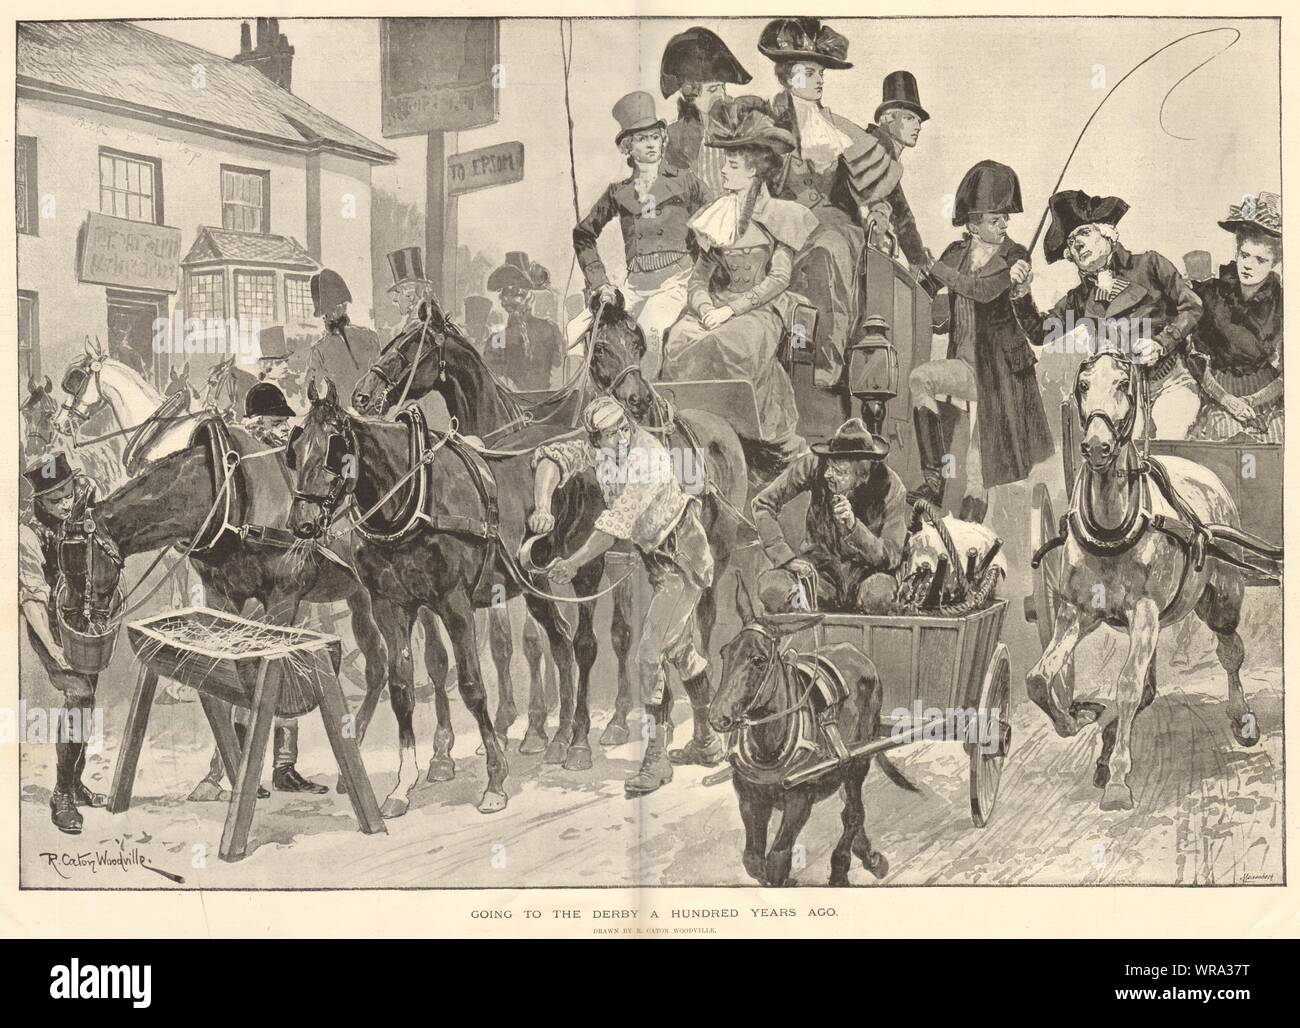 Going to the Epsom Derby in 1795, by R. Caton Woodville. Surrey. Society 1895 Stock Photo